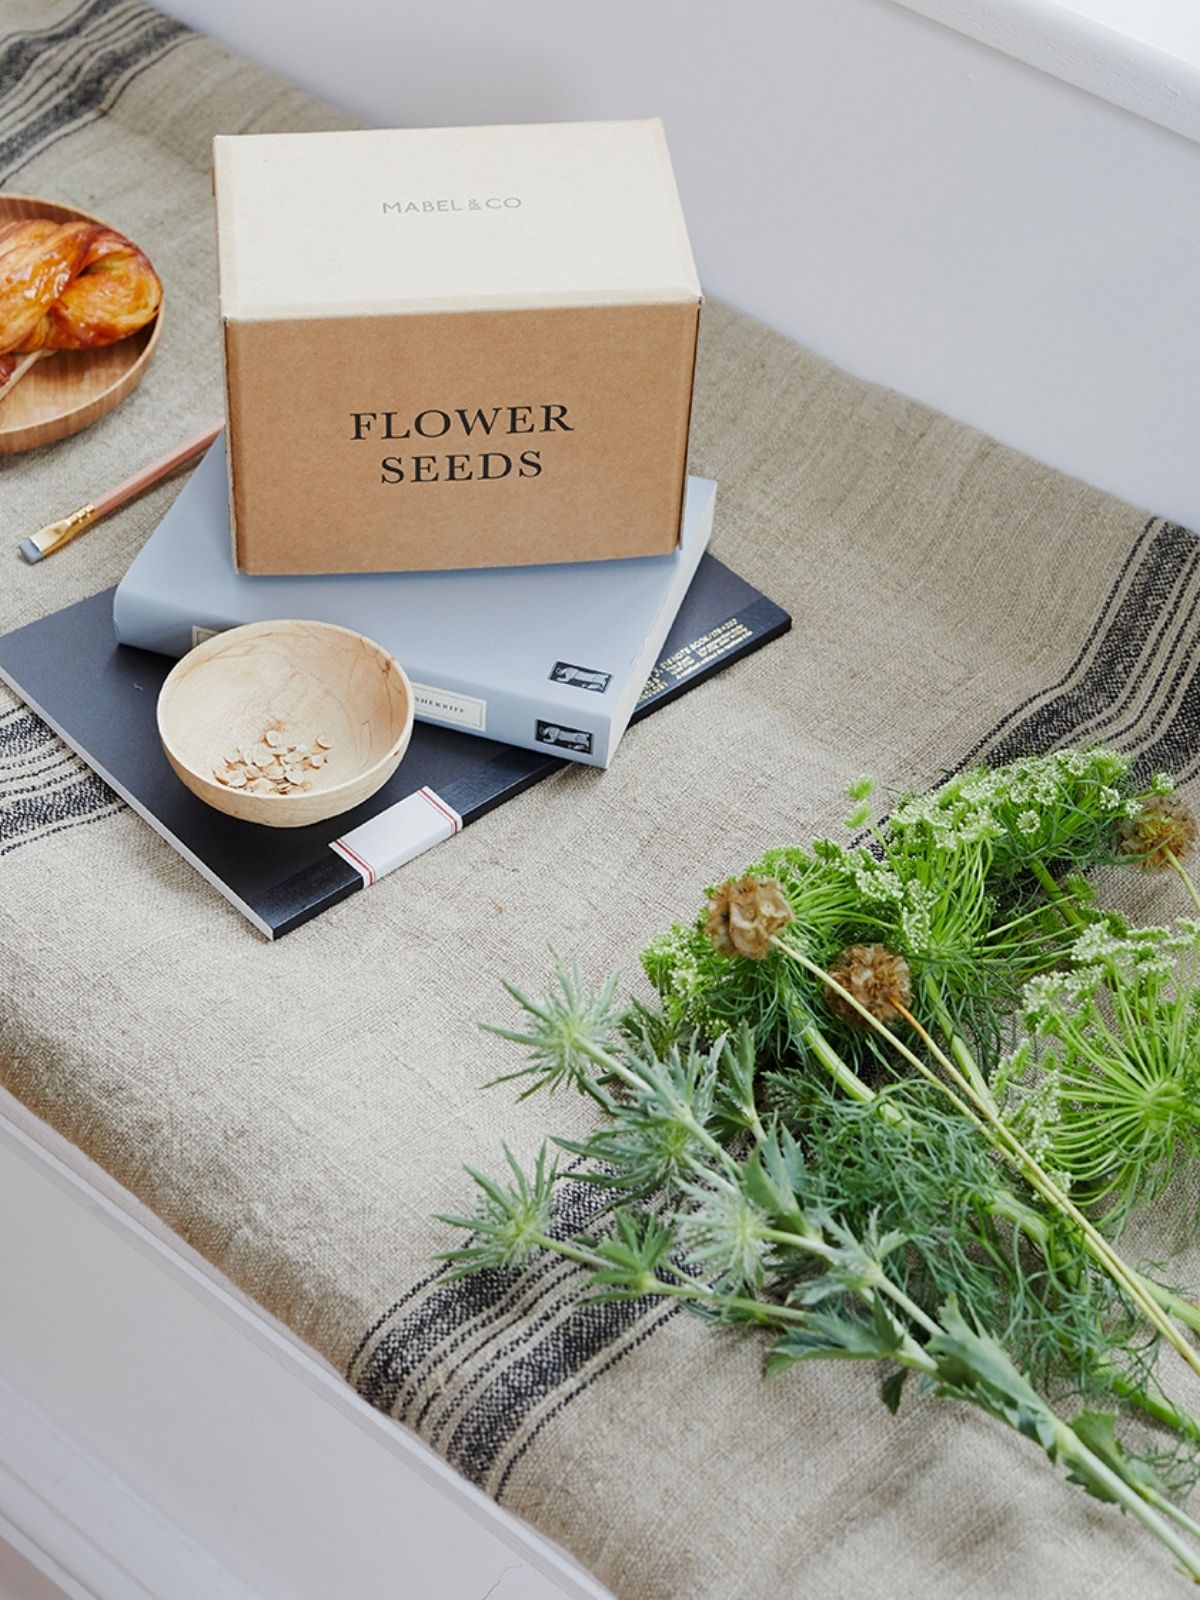 Box of flower seeds by Mabel & Co